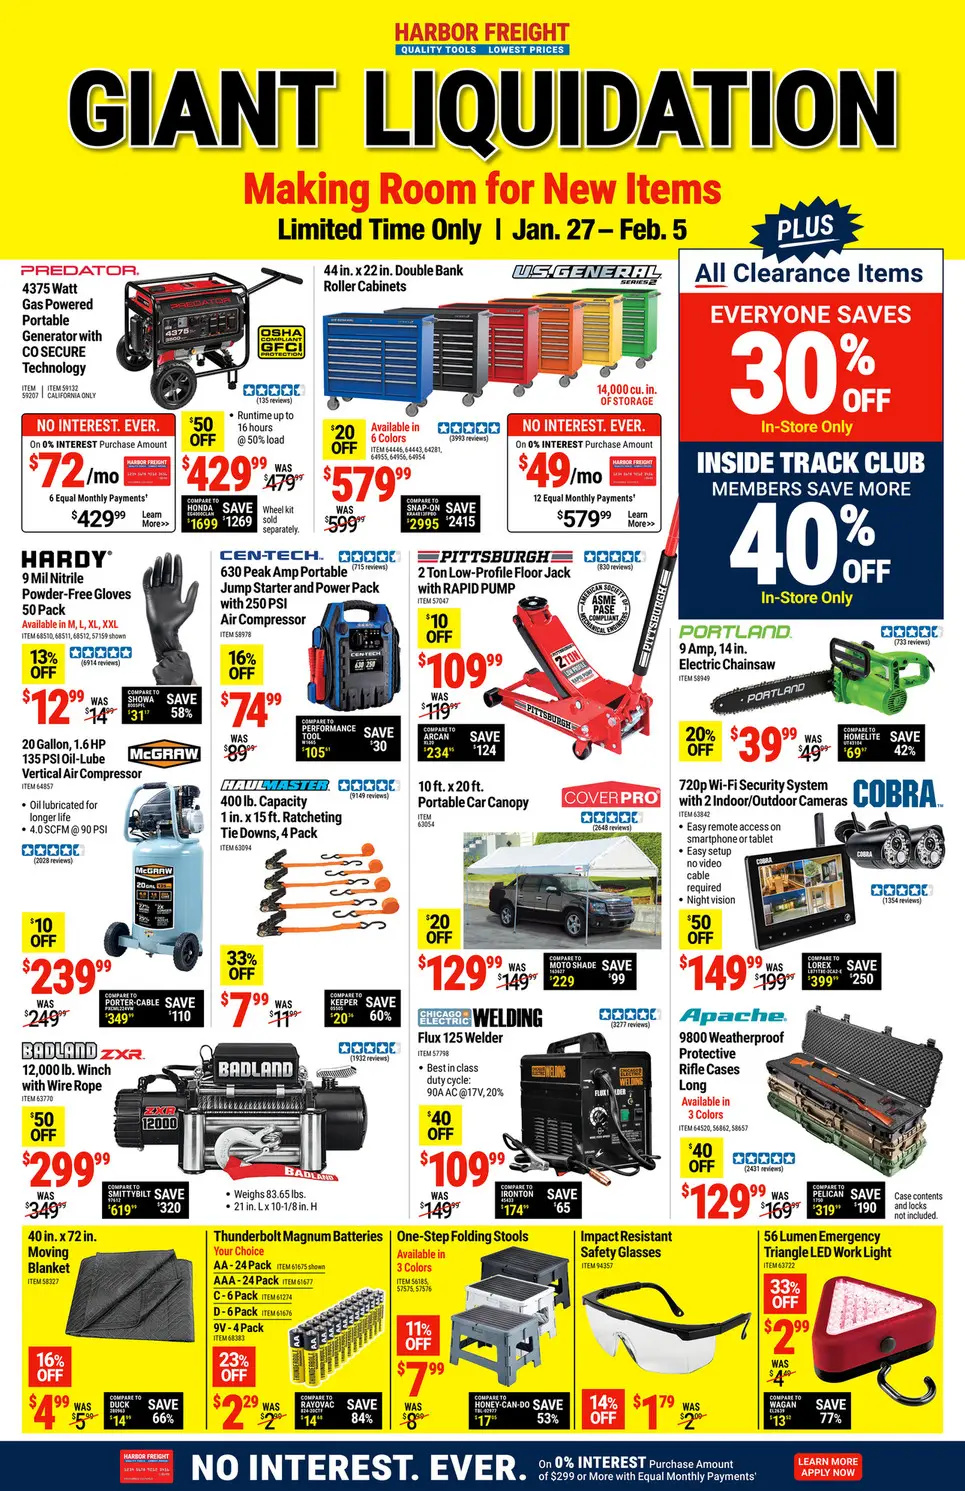 Harbor Freight Stores: Extra Savings on Clearance